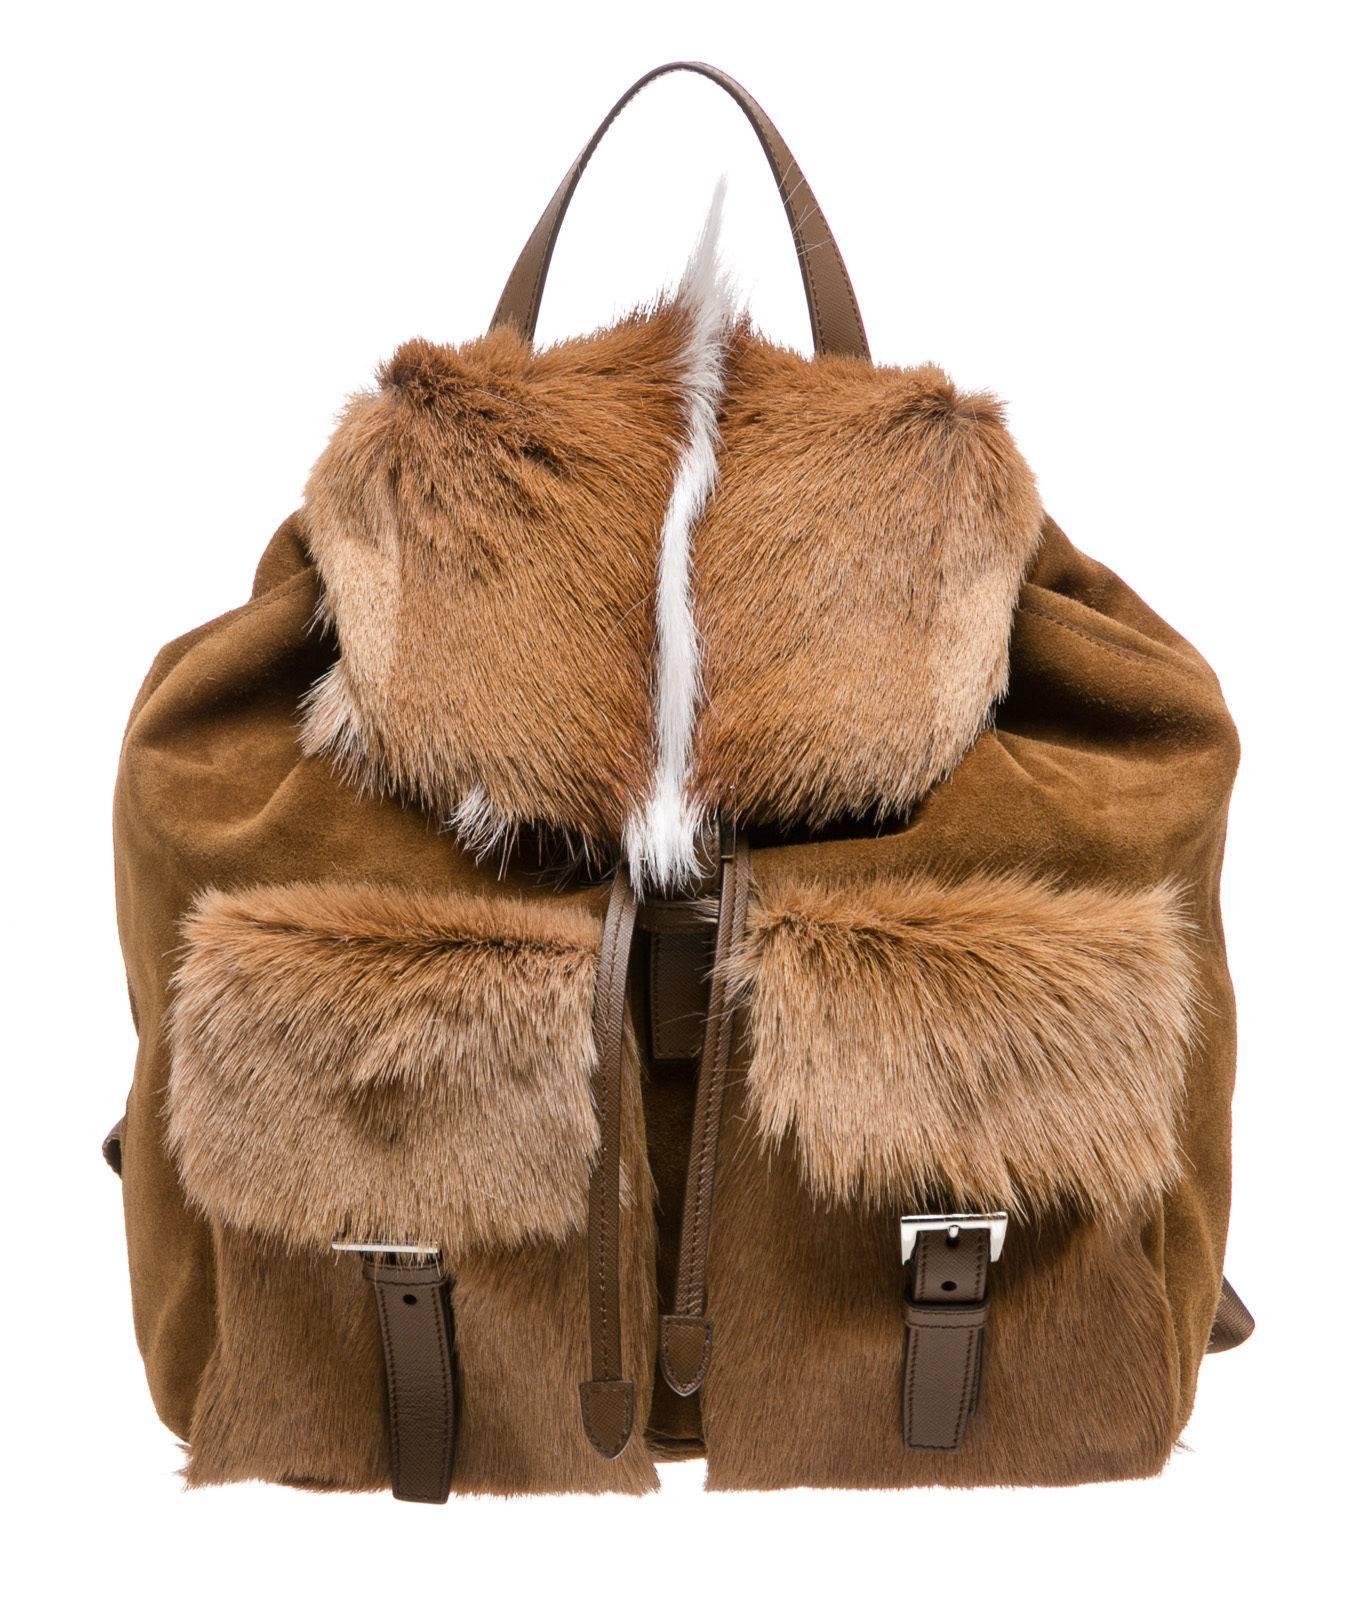 Designer: Prada
Type:
Handbag
Condition:
Exterior: Pre-owned in very good condition - faint scuffs
Interior: Pre-owned in excellent condition
Color:
Brown/White
Material:
Suede/Fur
Dimensions:
11.5